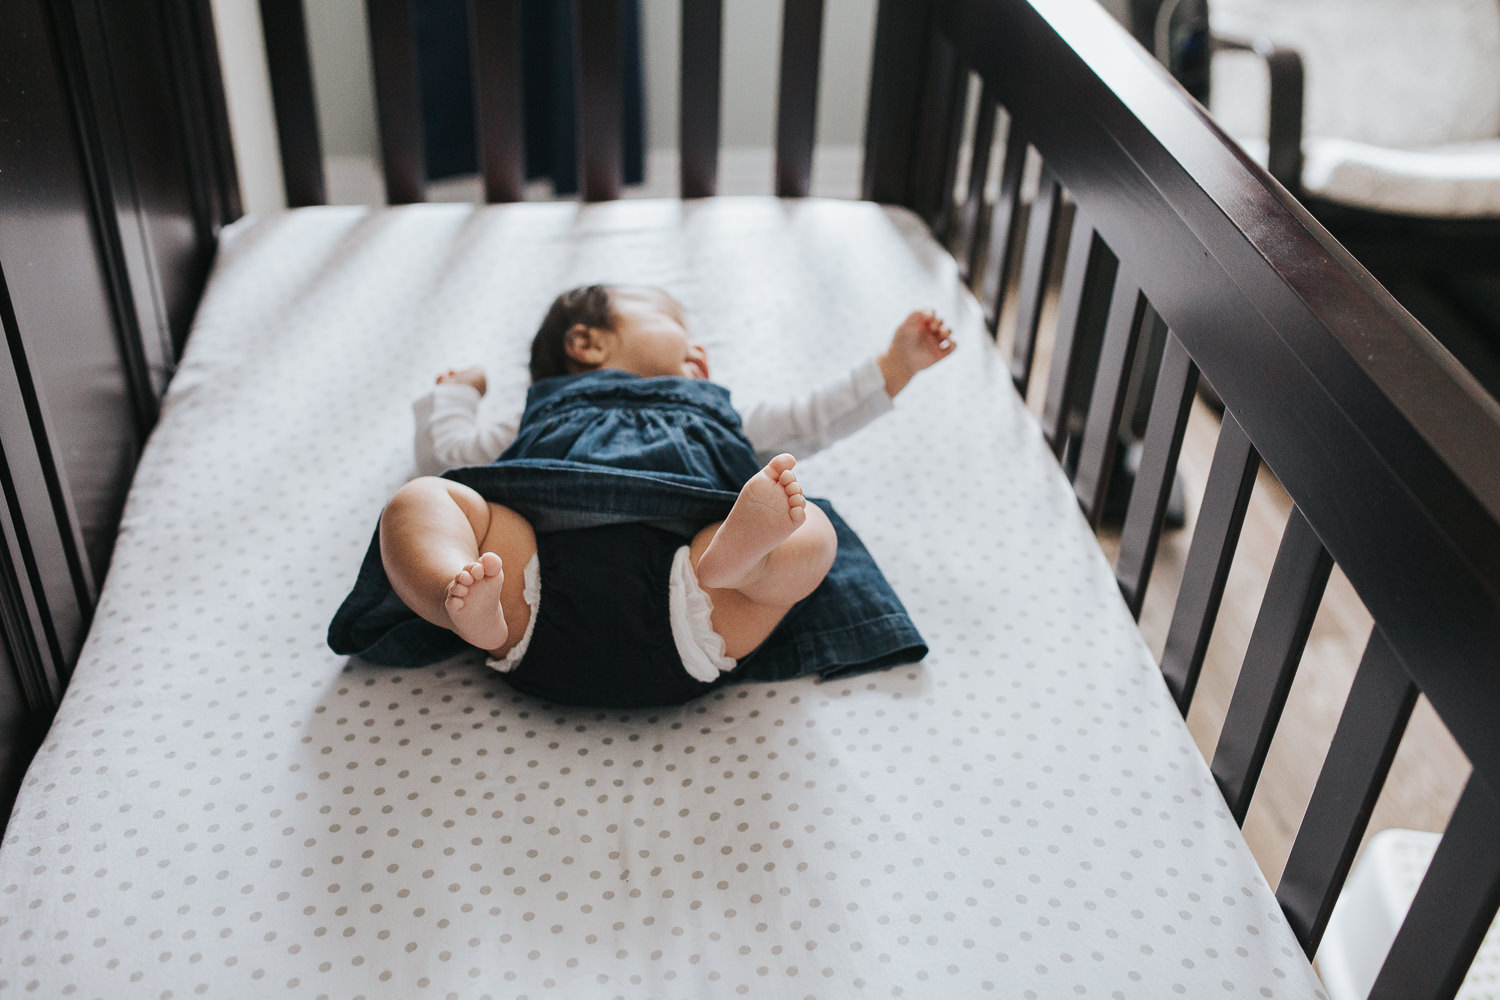 3 month old baby girl in blue dress lying in nursery crib with feet in air - Uxbridge Lifestyle Photography